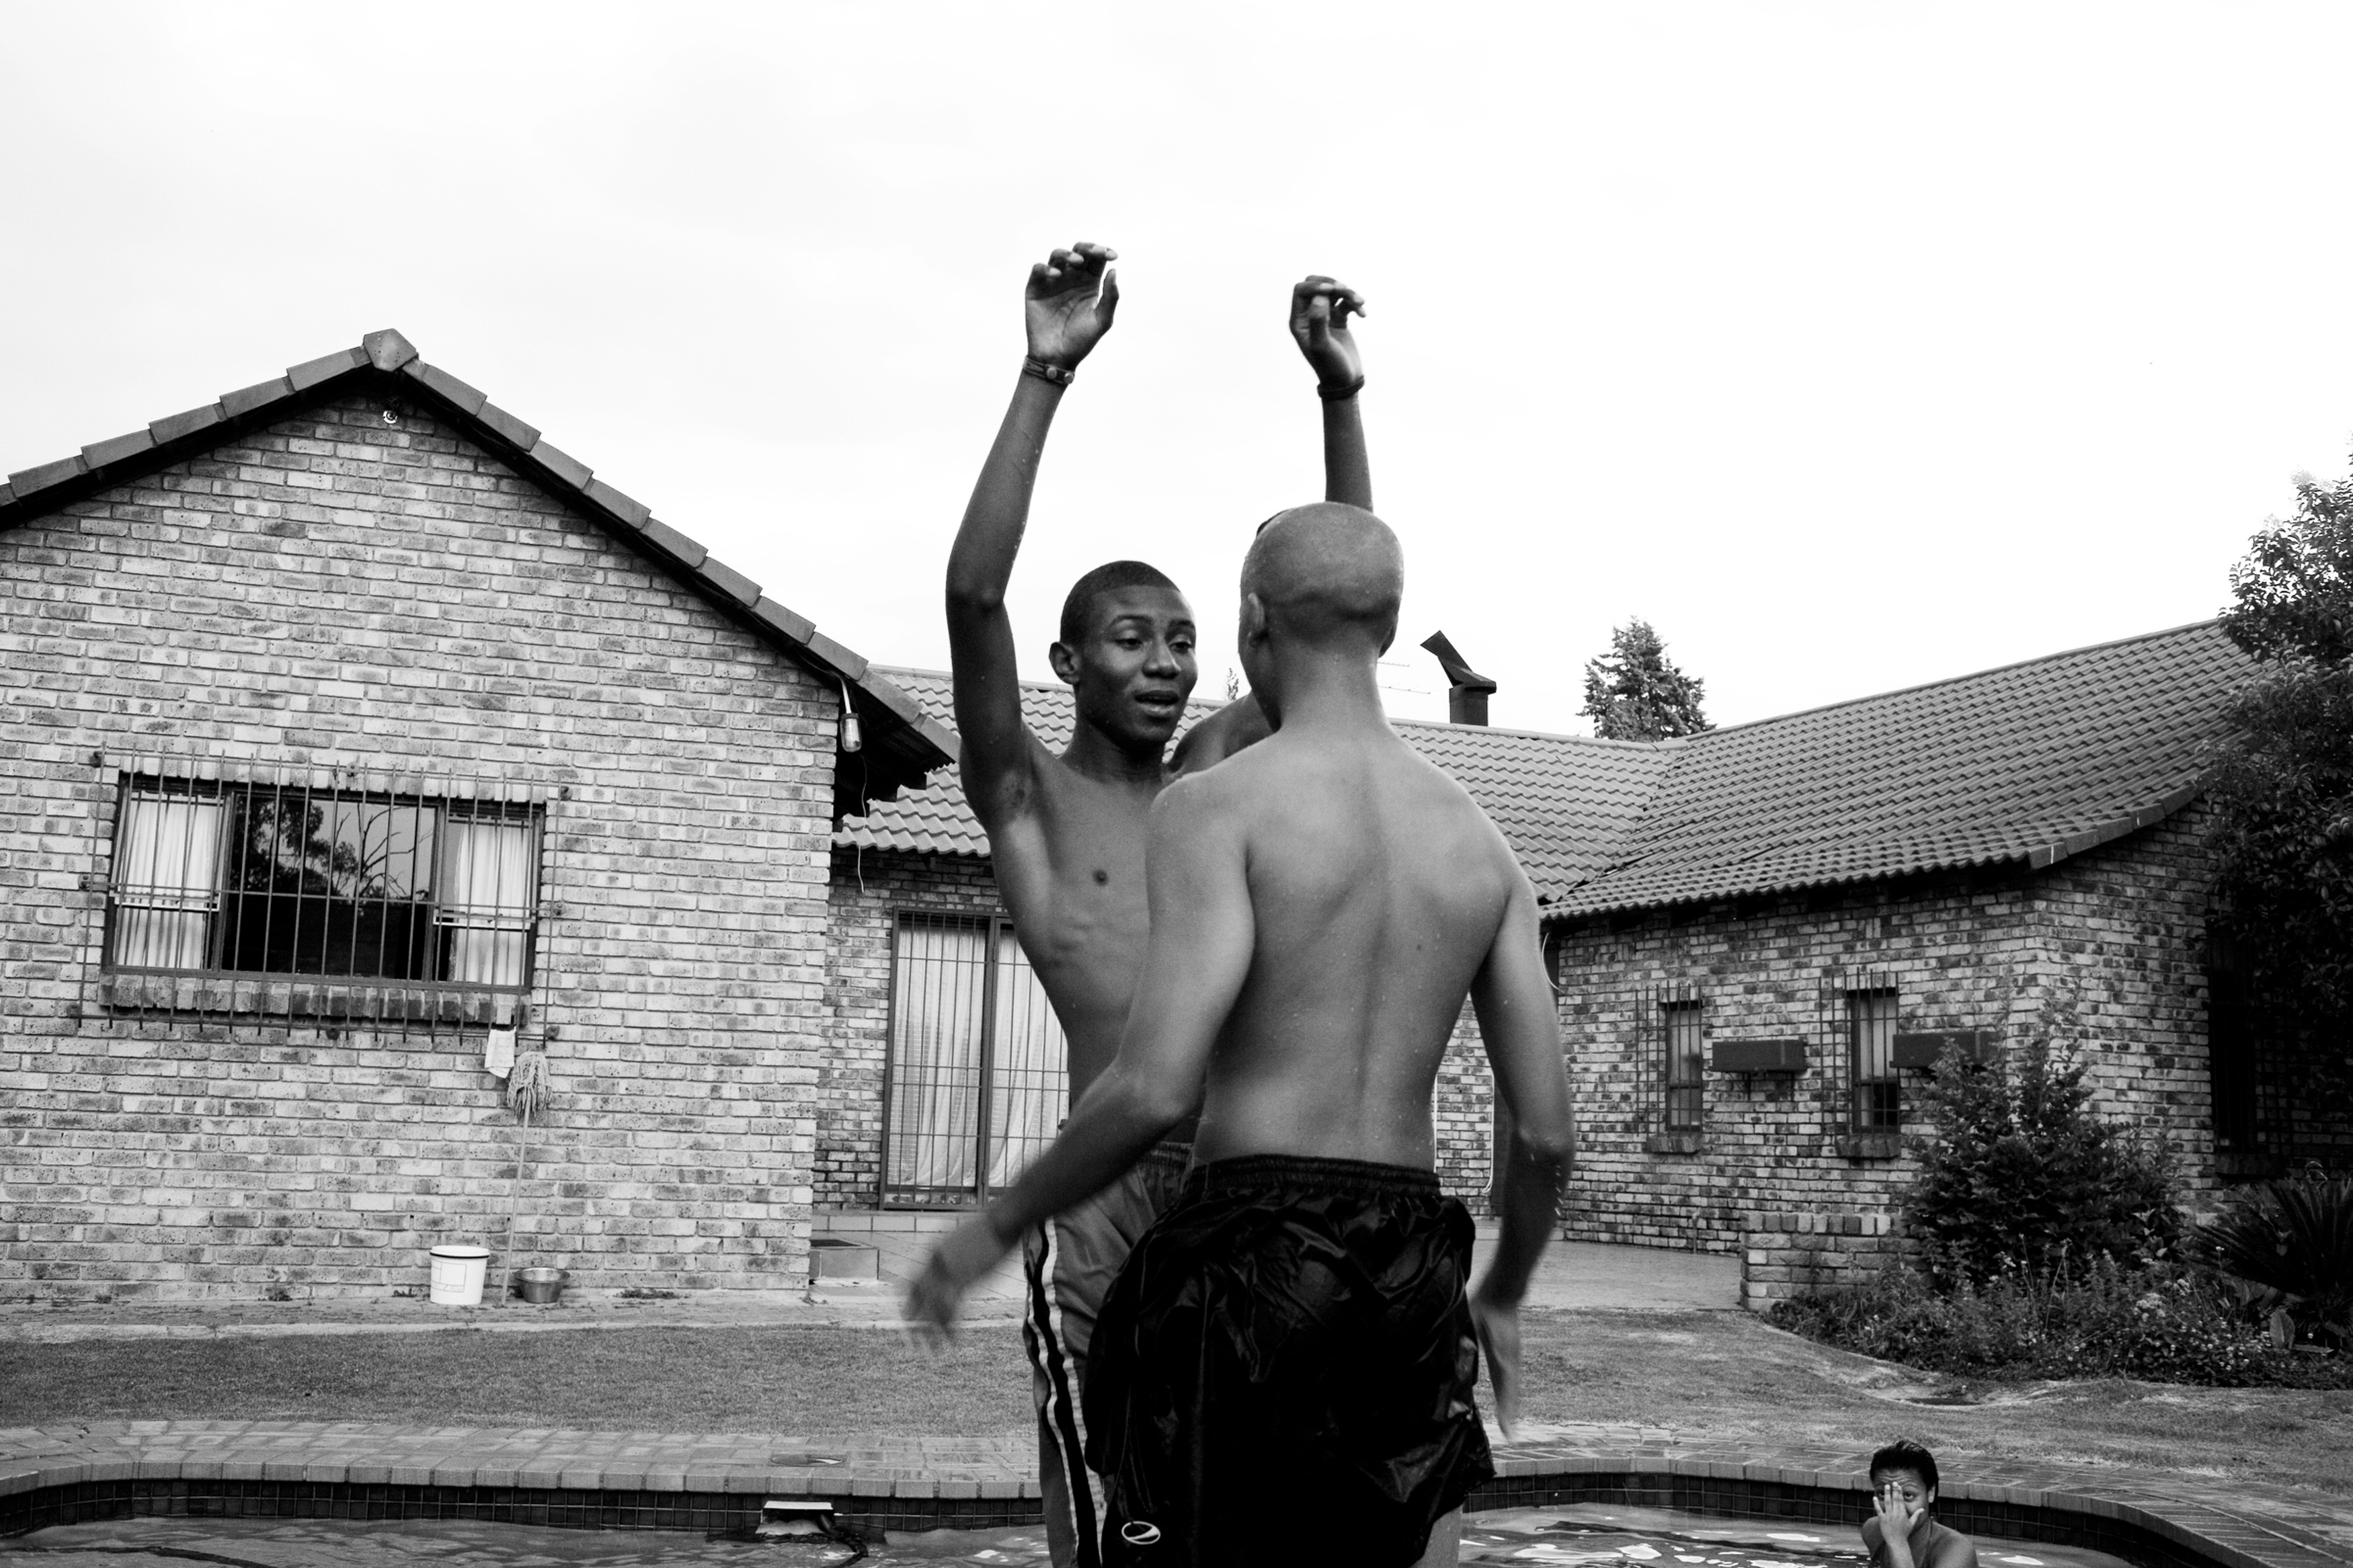 Friends play around the pool in the growing middle class neighborhood of Kibler Park, Johannesburg.